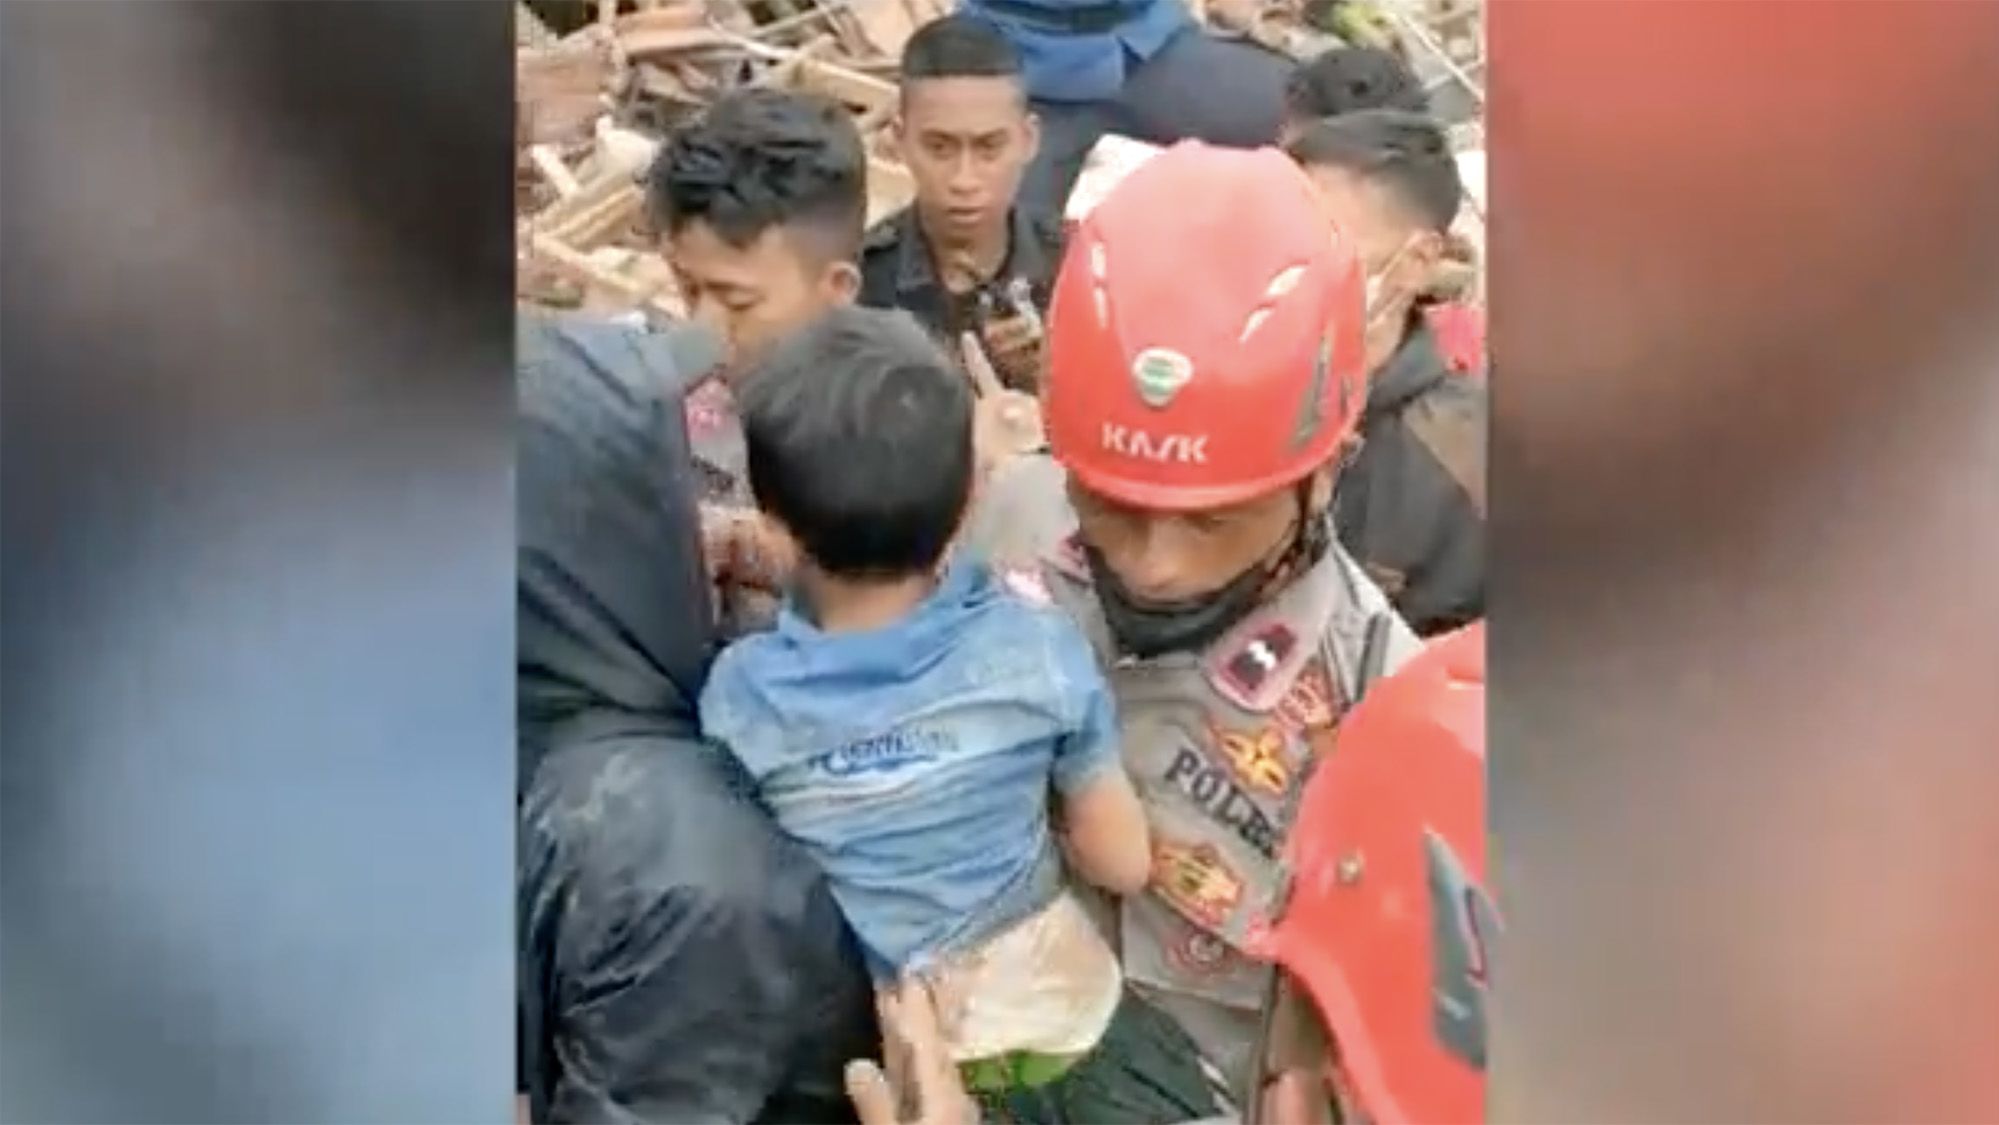 Indonesia's National Agency for Disaster Management (BNPB) said they saved Azka in the village of Nagrak.